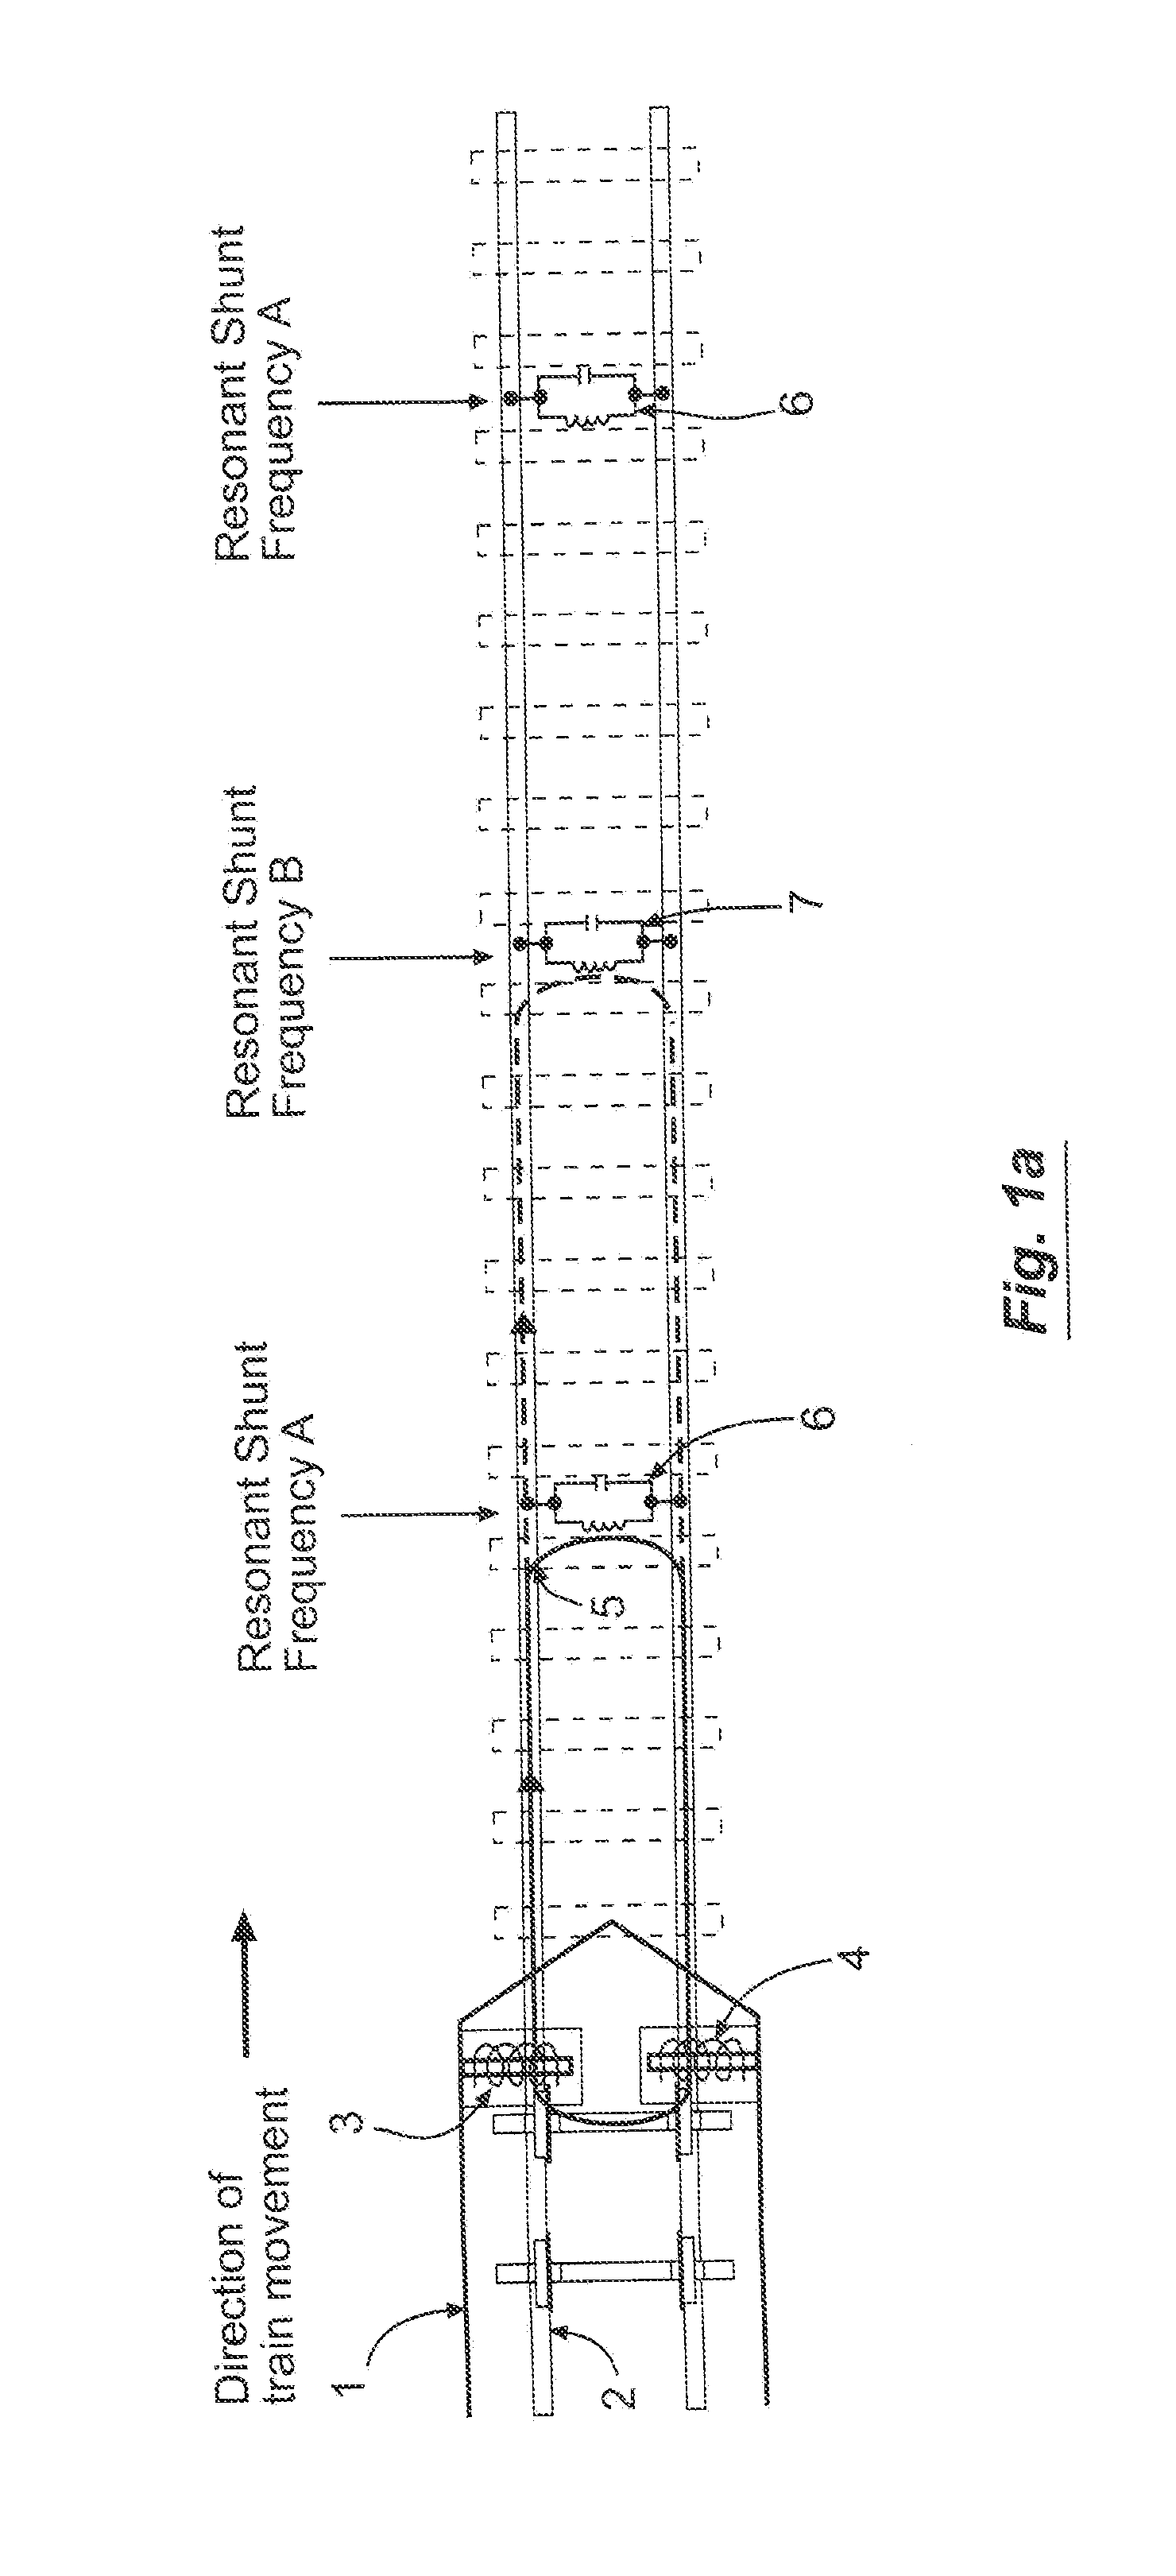 System and method for detecting broken rail and occupied track from a railway vehicle